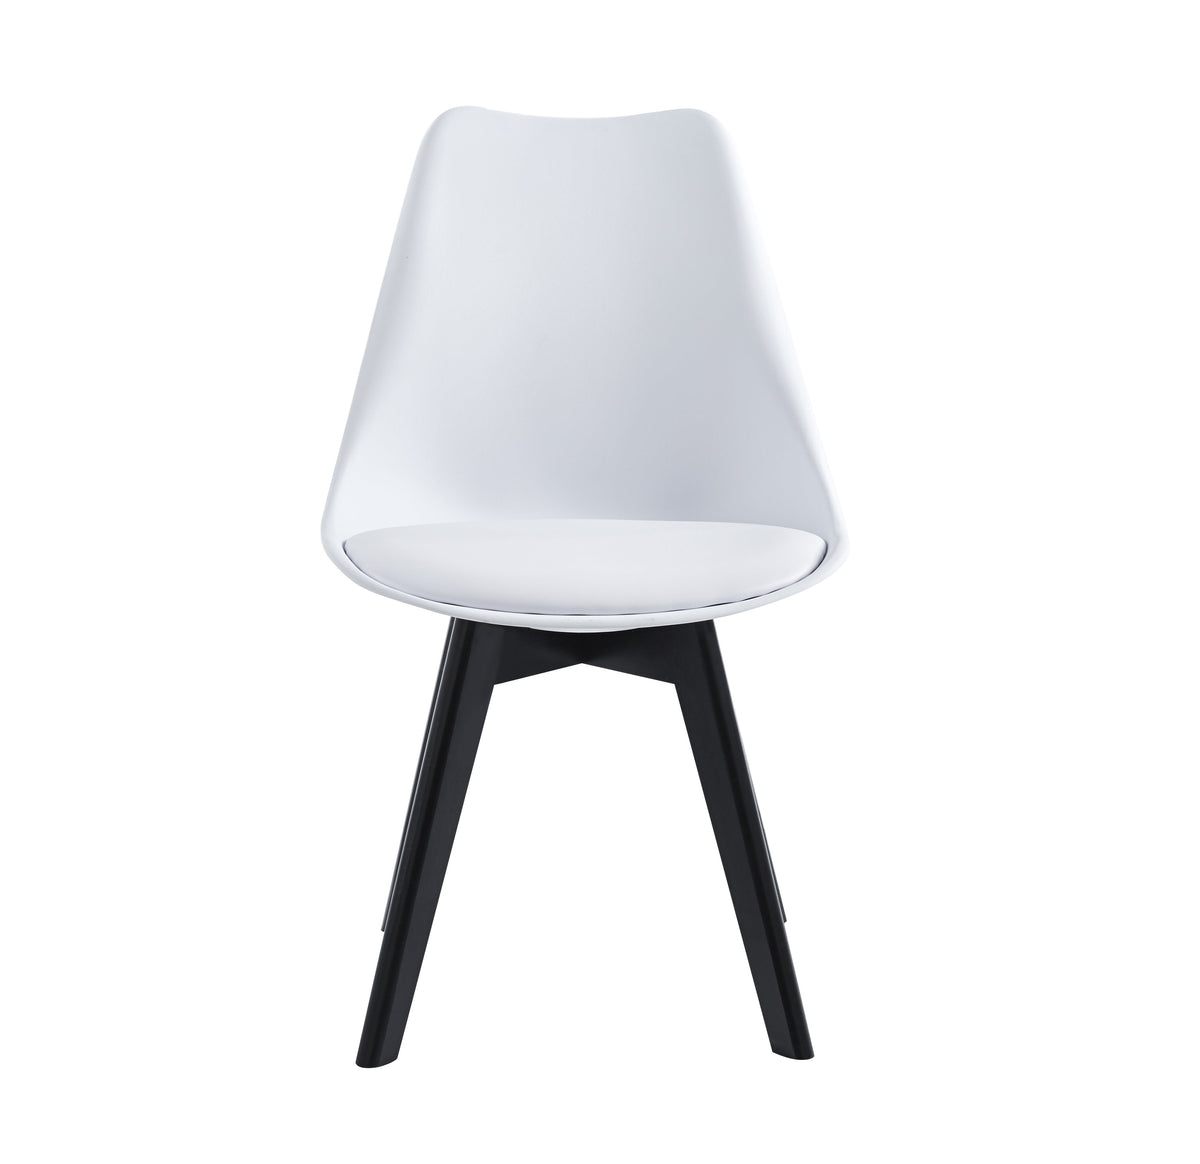 4 x Harris Ergonomic Dining Chairs - White Chairs with Black Wooden Legs Casa Maria Designs 